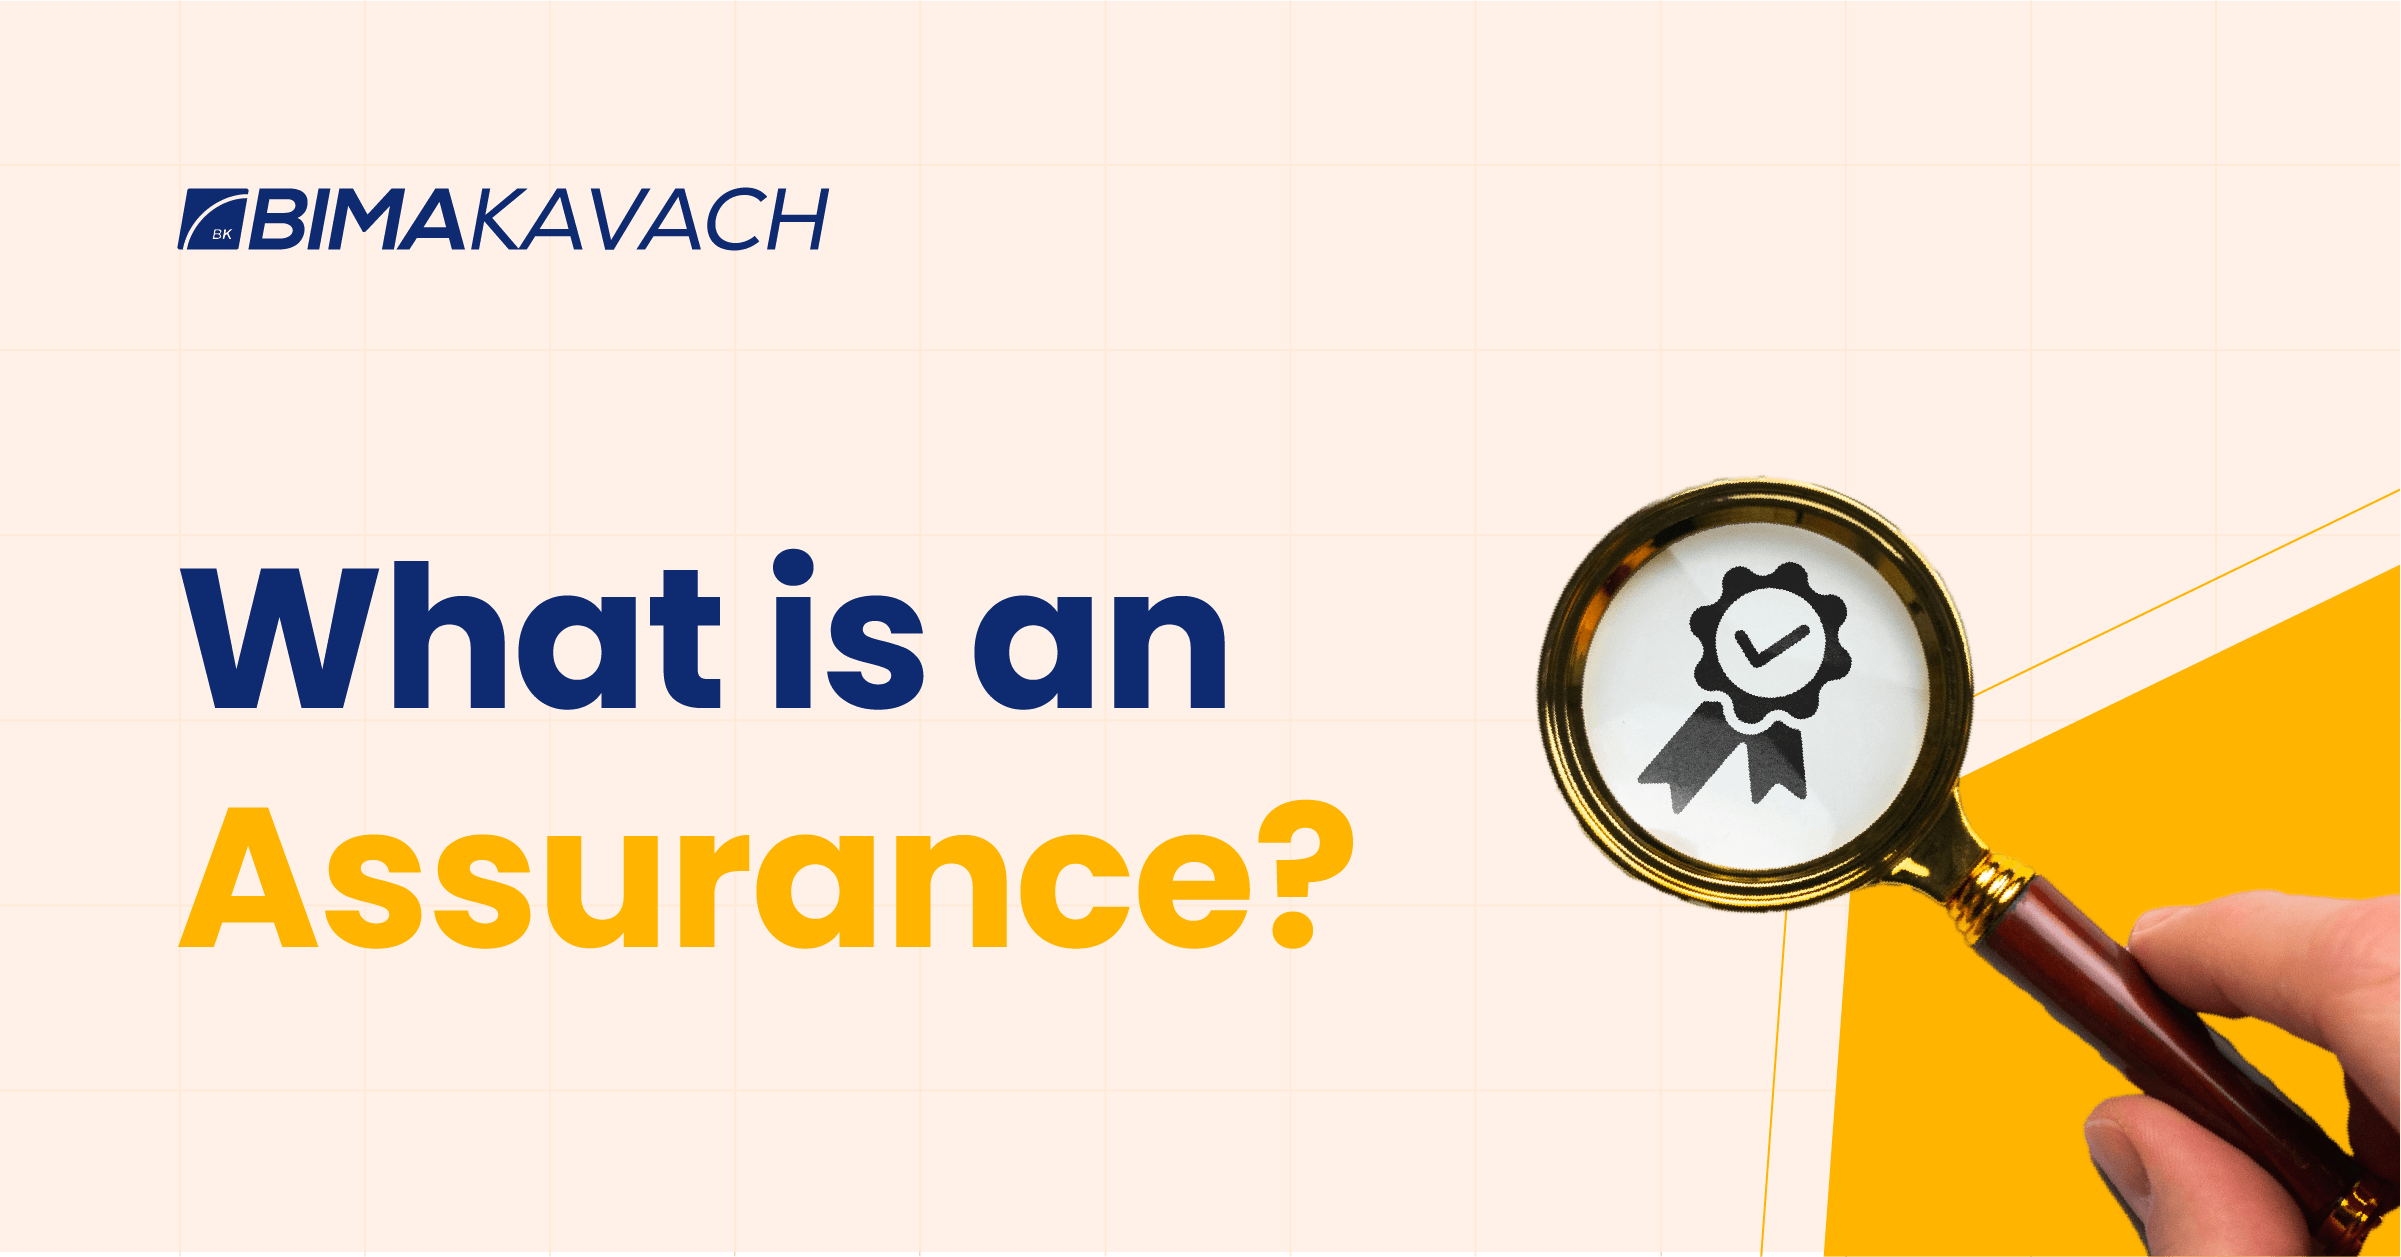 What is an assurance?